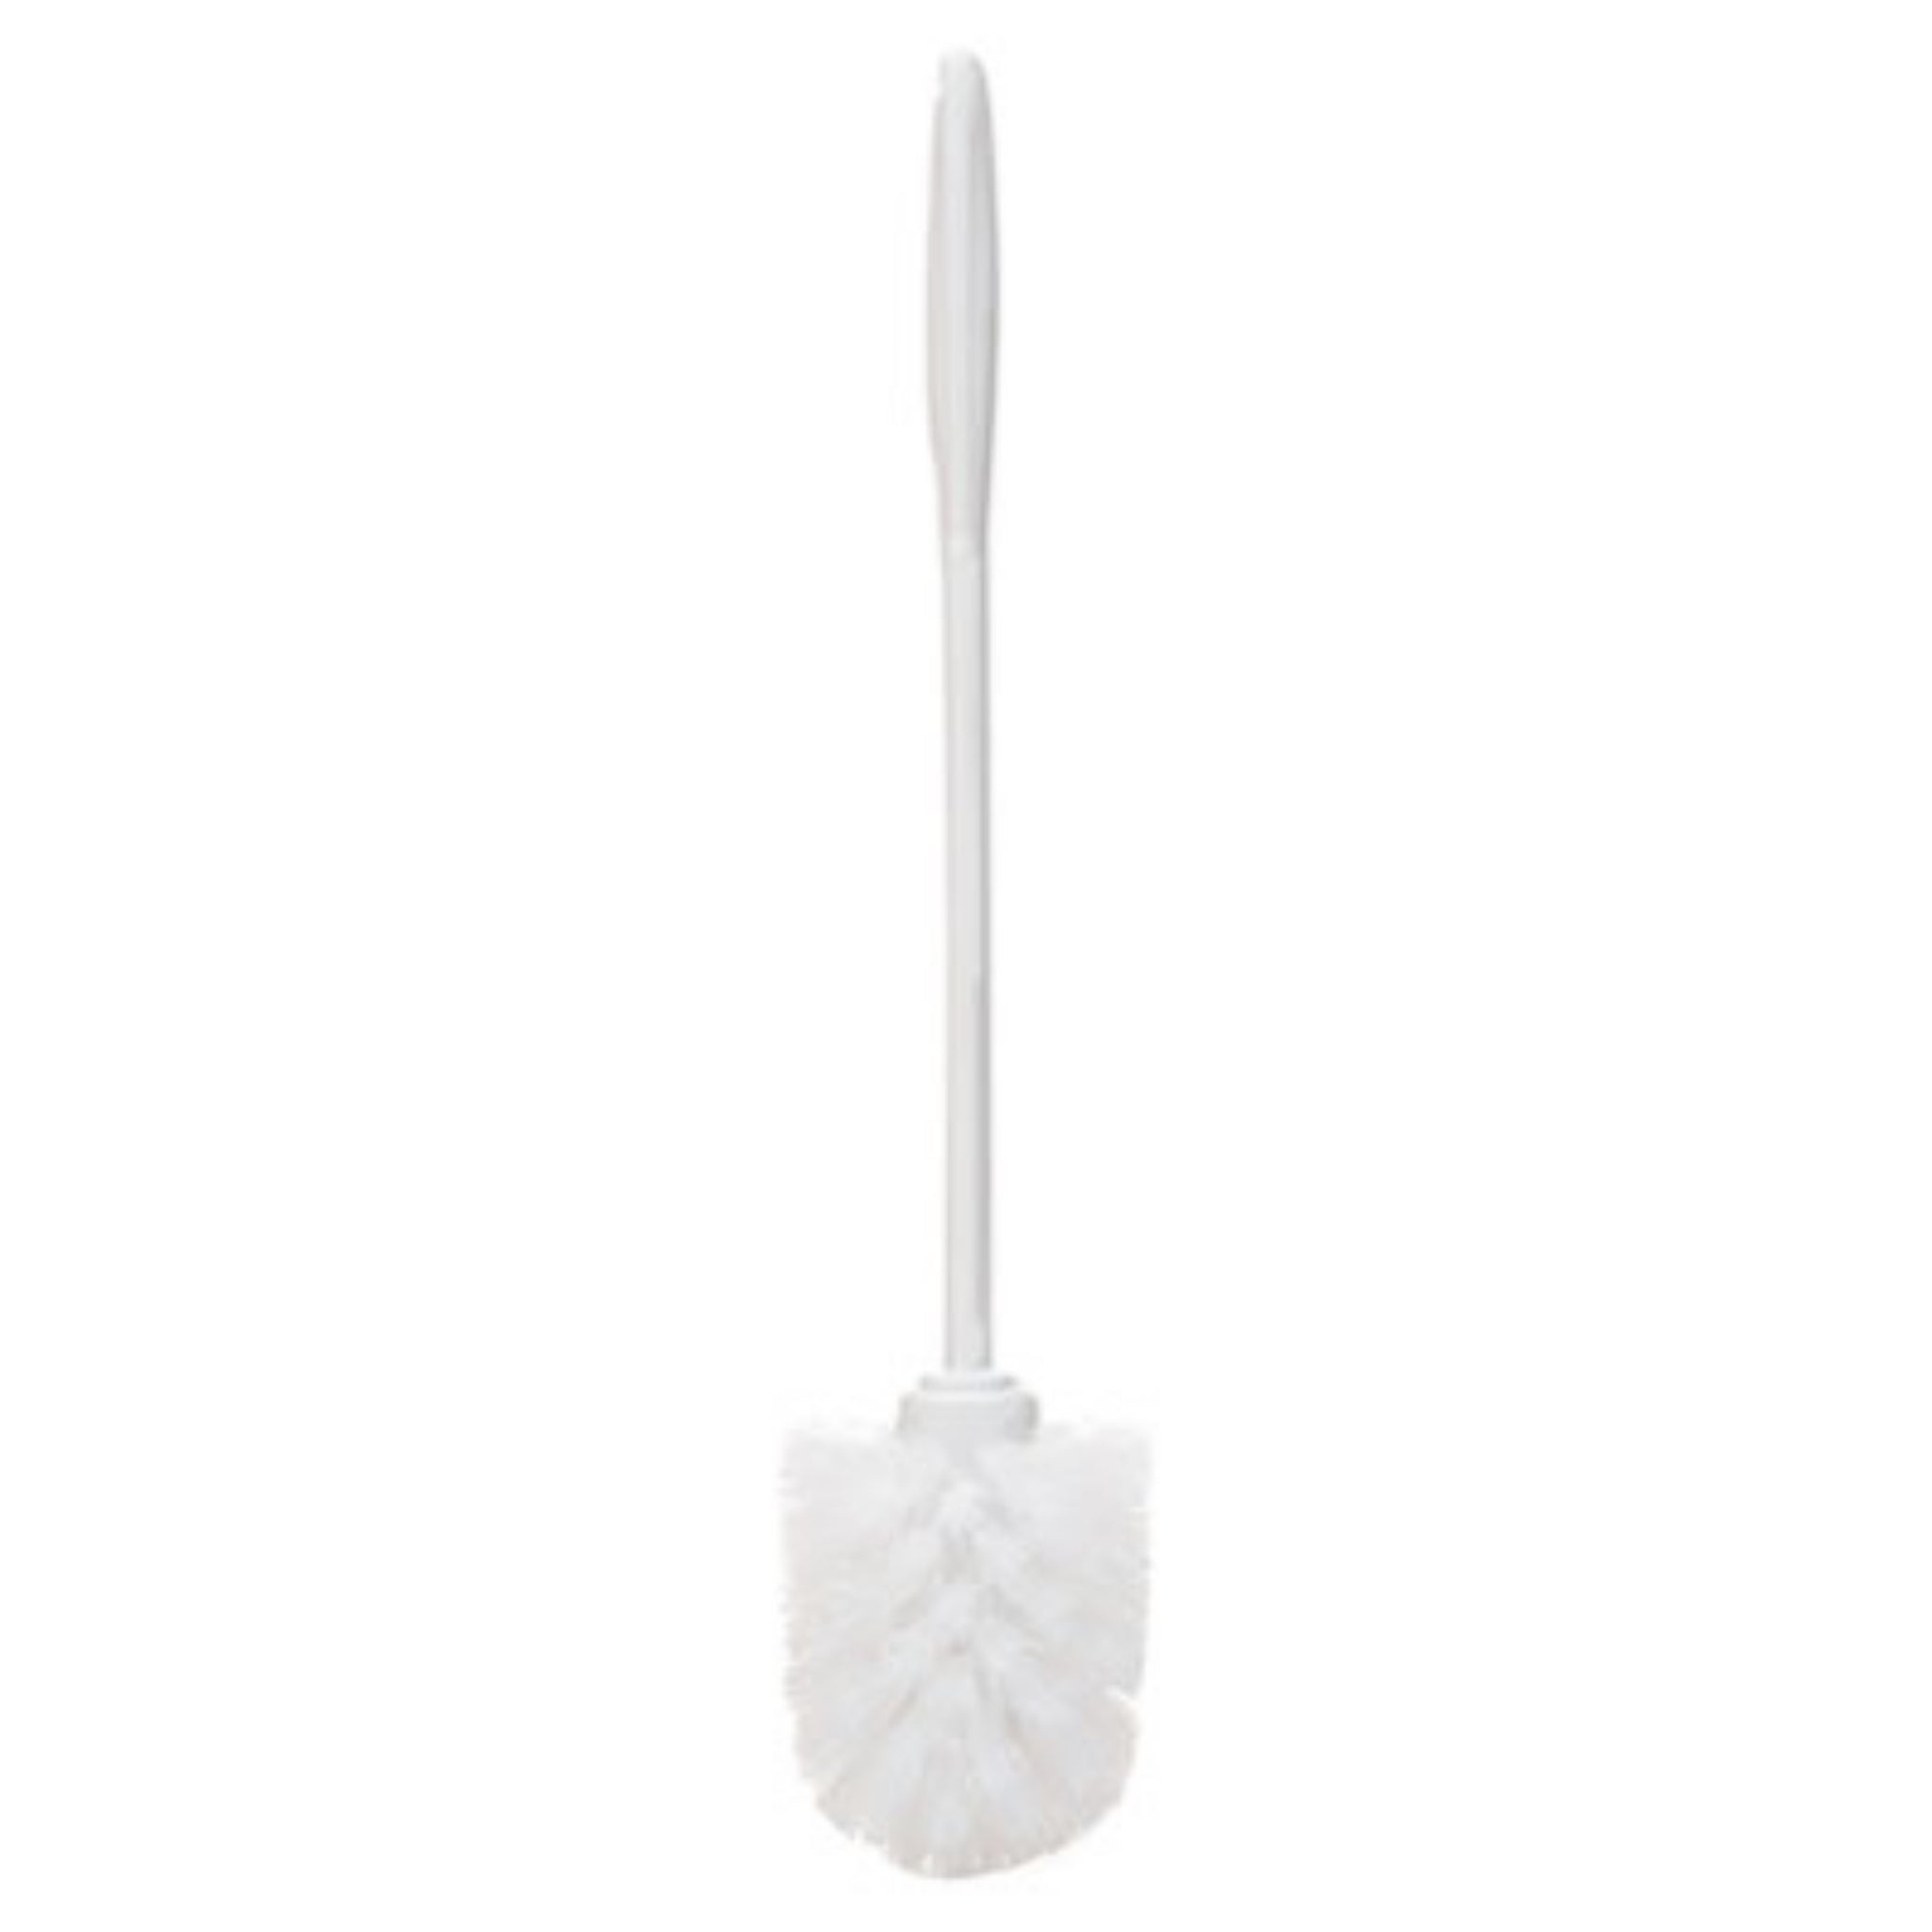 RUBBERMAID COMMERCIAL PROD. RCP631000WE Toilet Bowl Brush, White